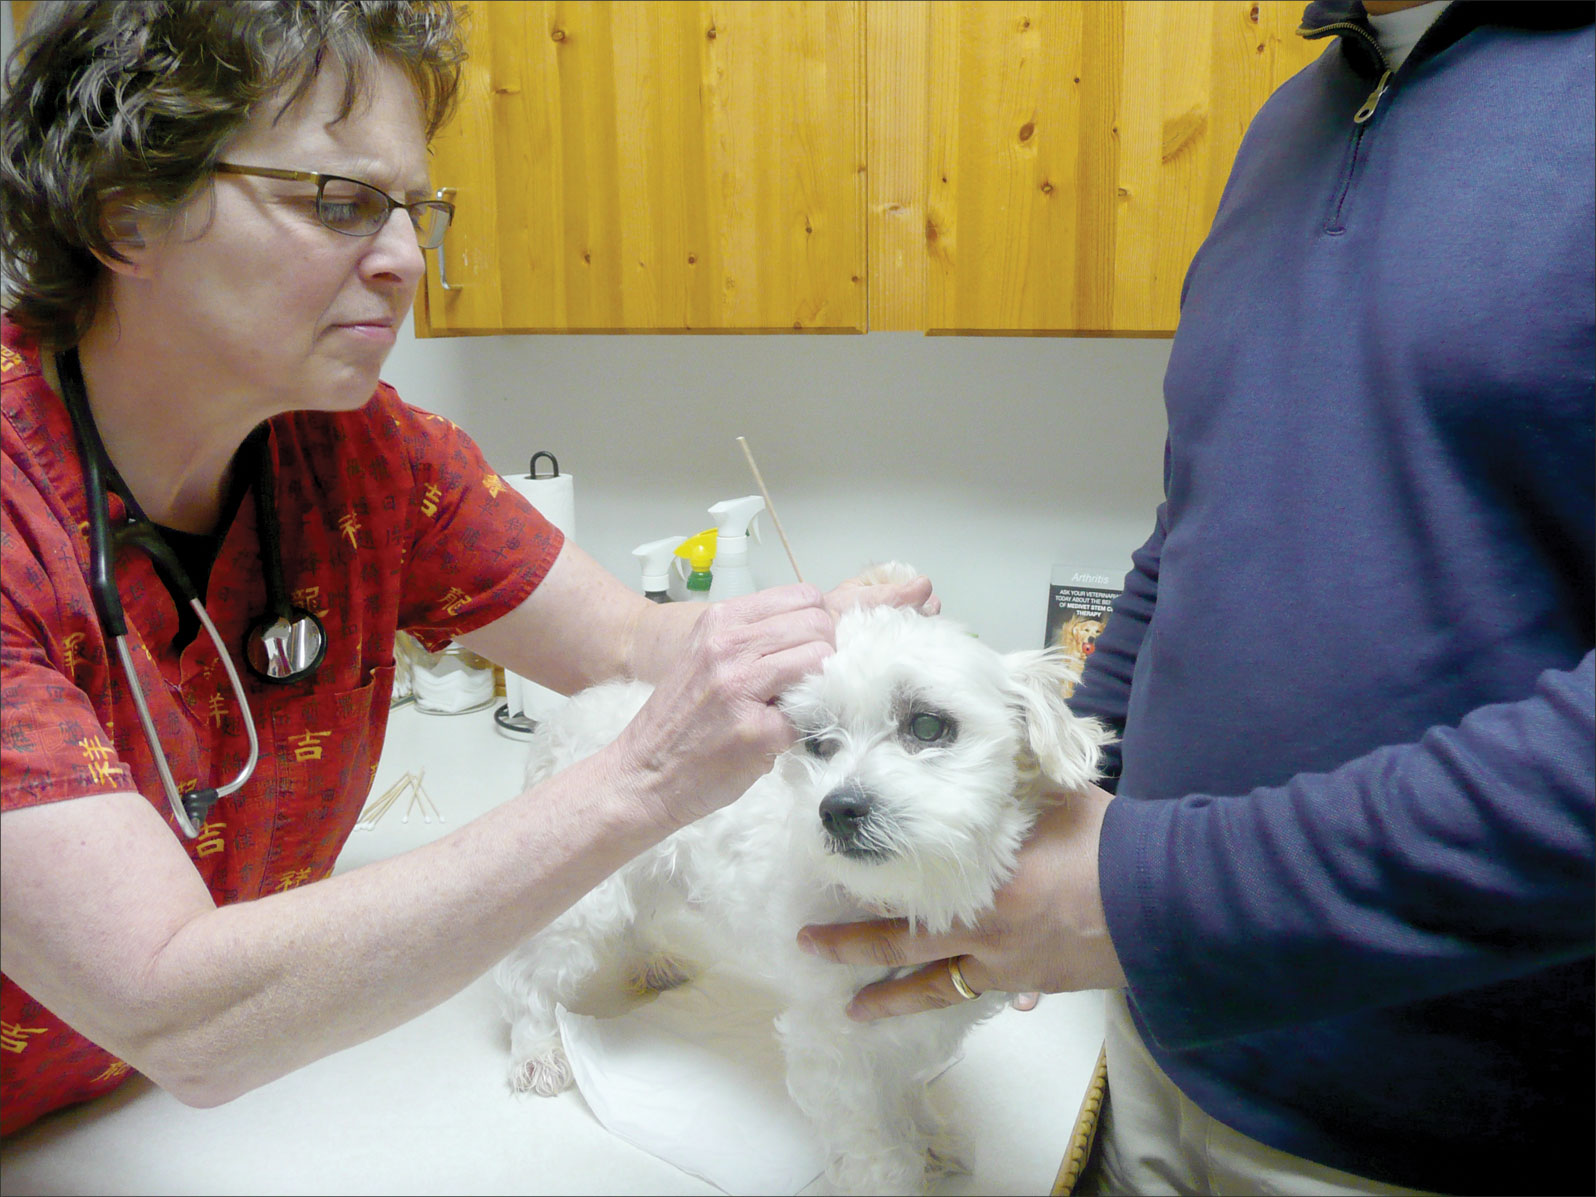 A veterinarian is seen examining a small white dog's ear